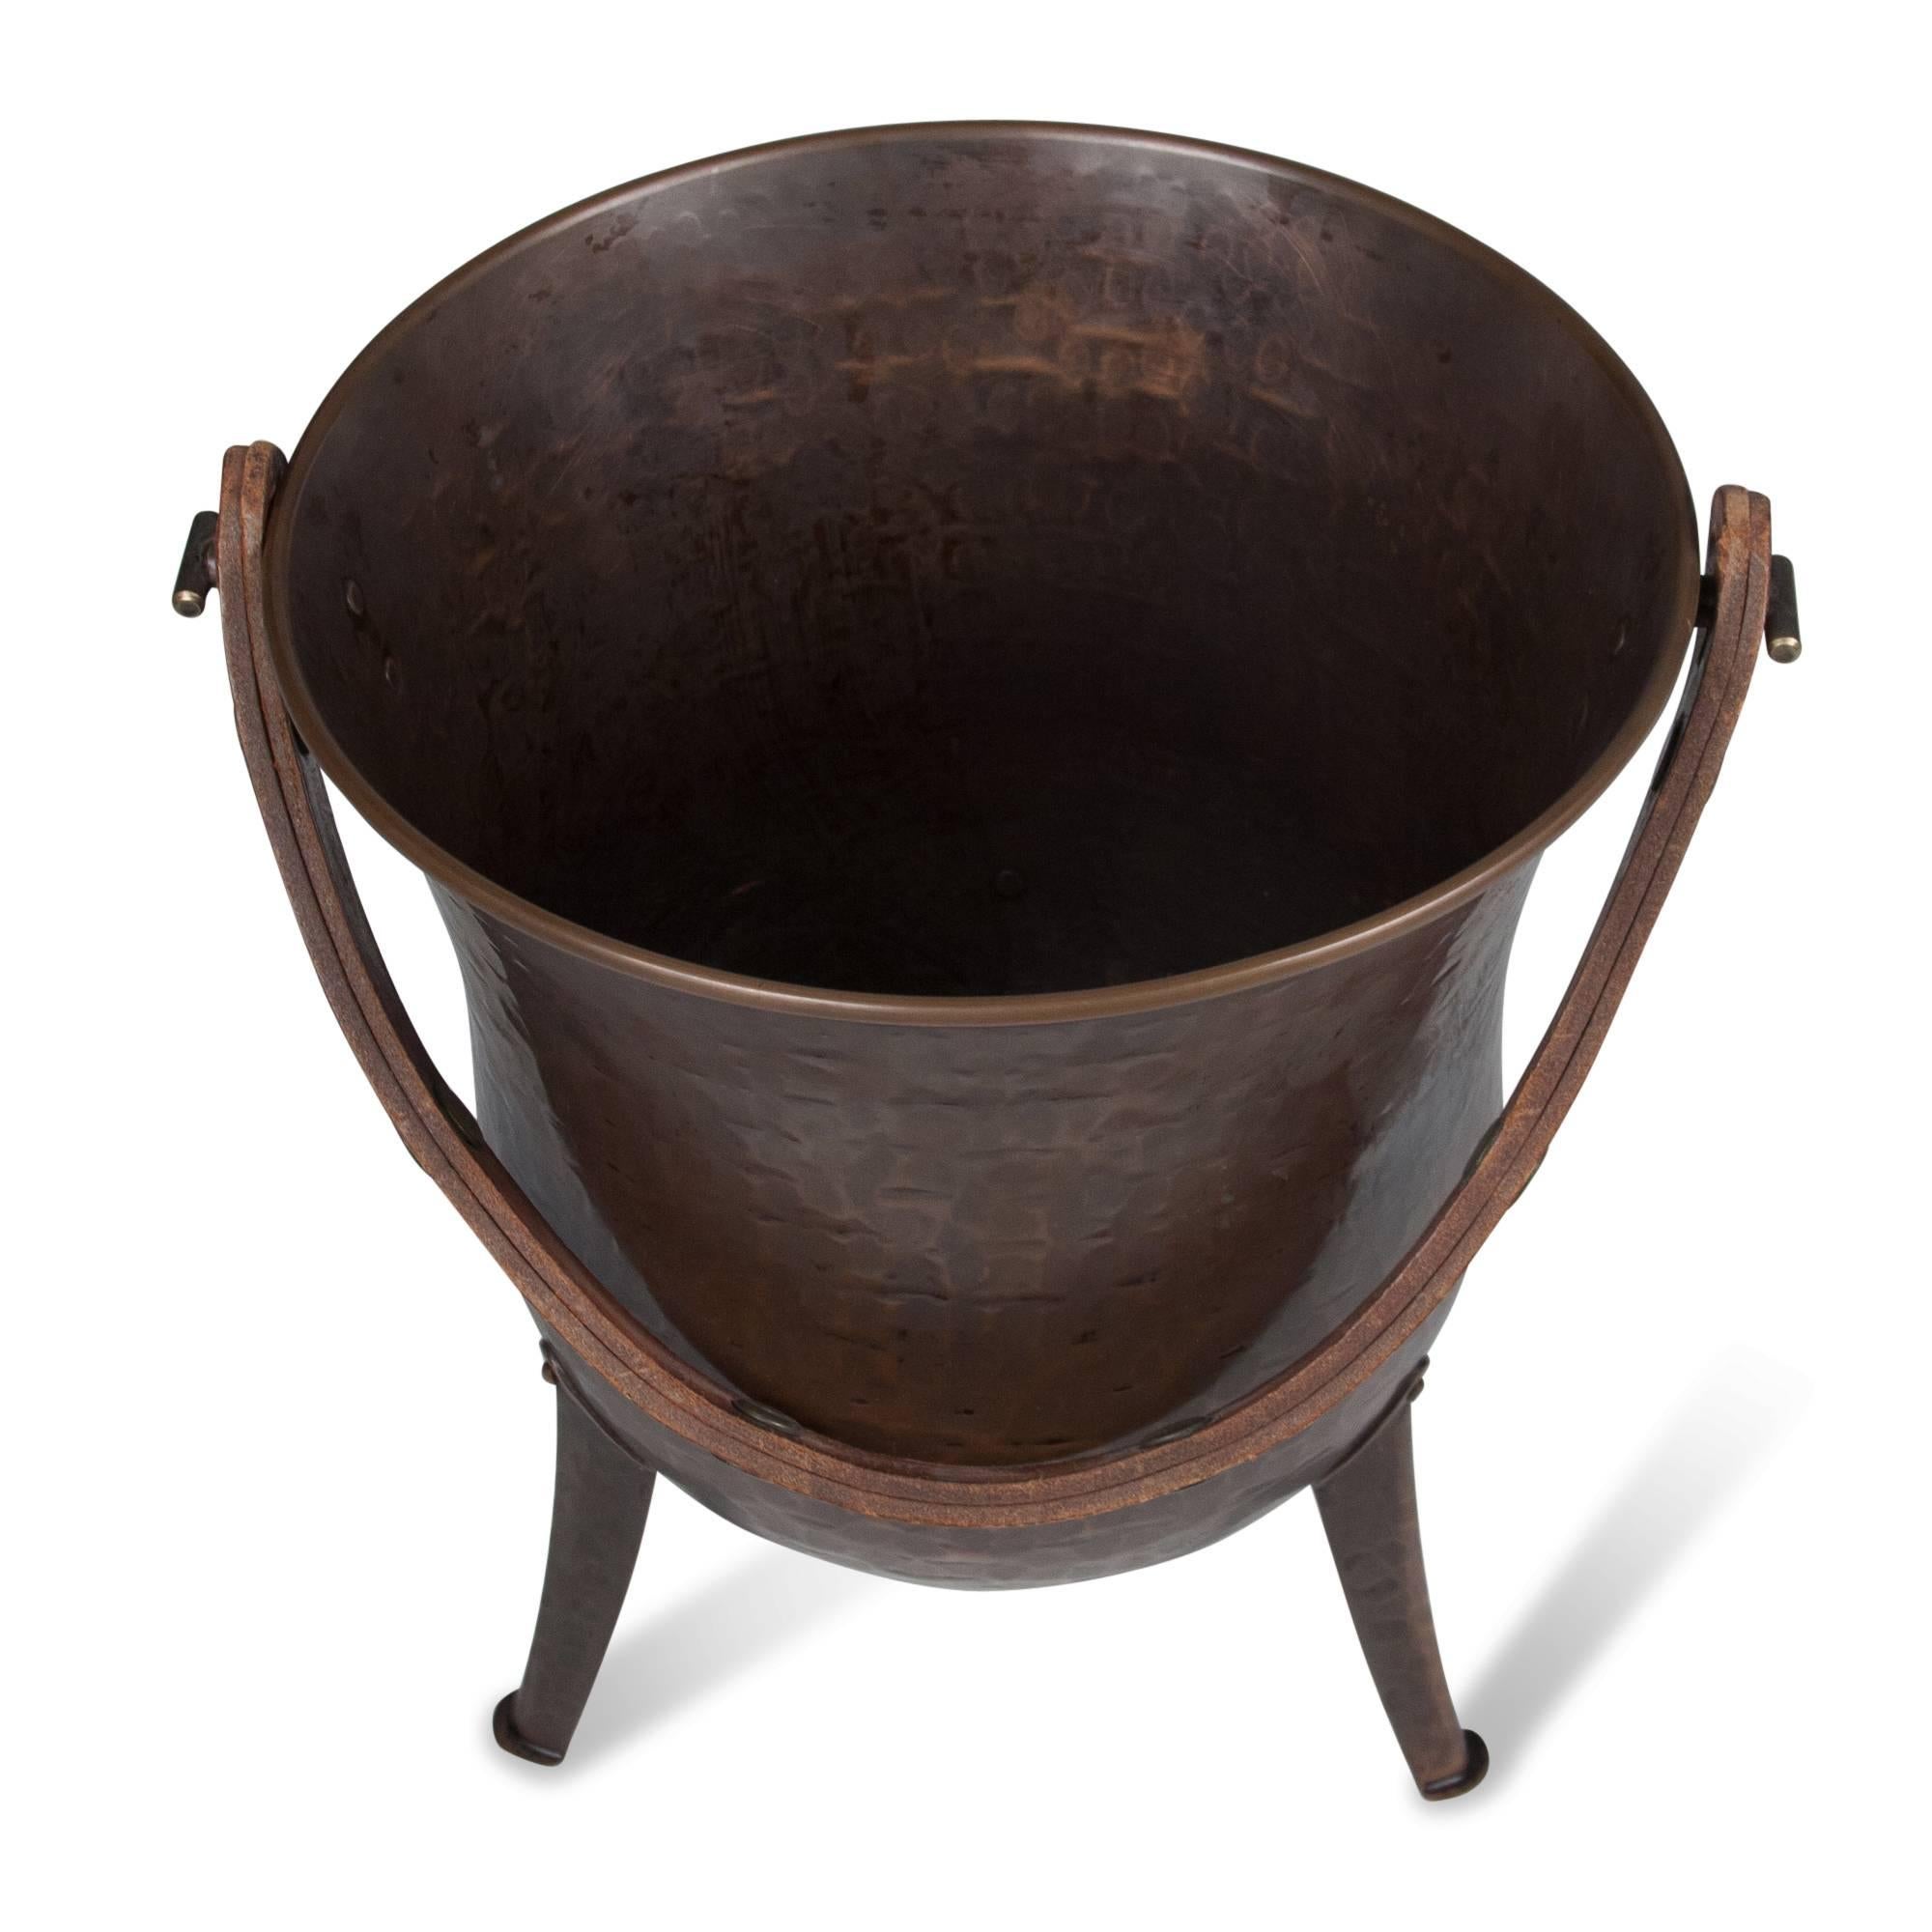 Textured and patinated copper metal bucket, raised on three legs, with leather strap handle, Germany, 1930s. Measures: Height 10 1/2 in, depth 9 1/2 in. (sats)